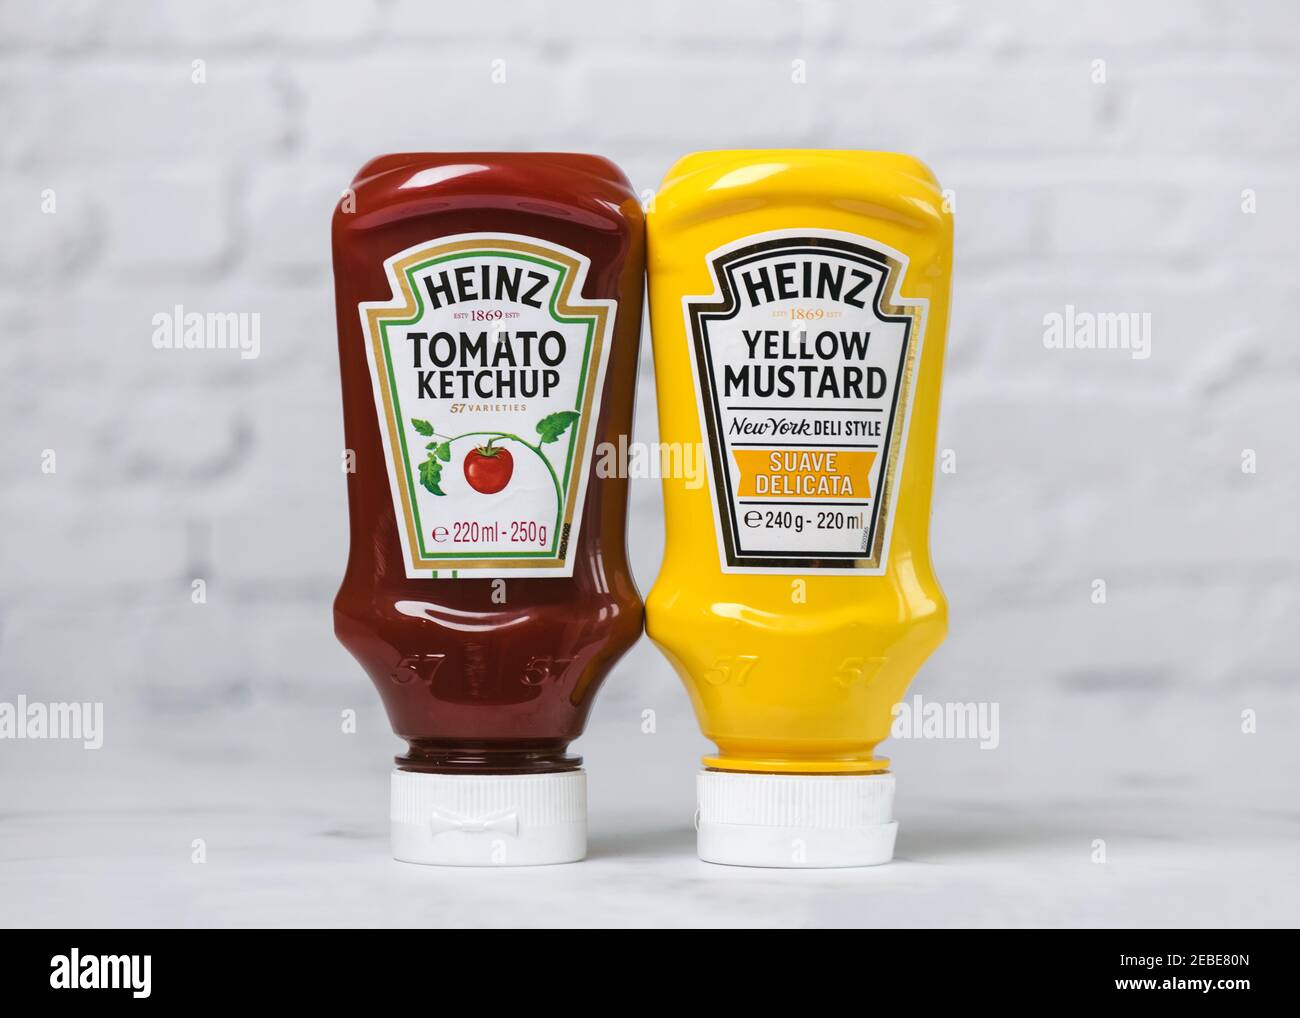 Heinz Ketchup bottle and bottle of Heinz Yellow Mustard on a white table Stock Photo